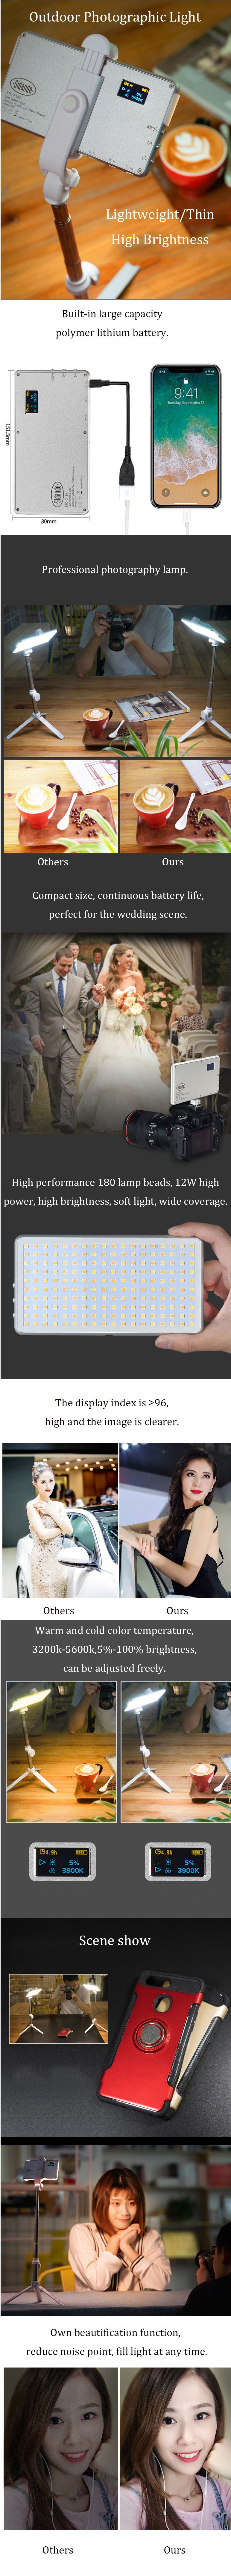 SIDANDE-STD-X180-Portable-12W-180LED-4040mAh-USB-Rechargeable-Work-Light-Outdoor-Photographic-Light--1604744